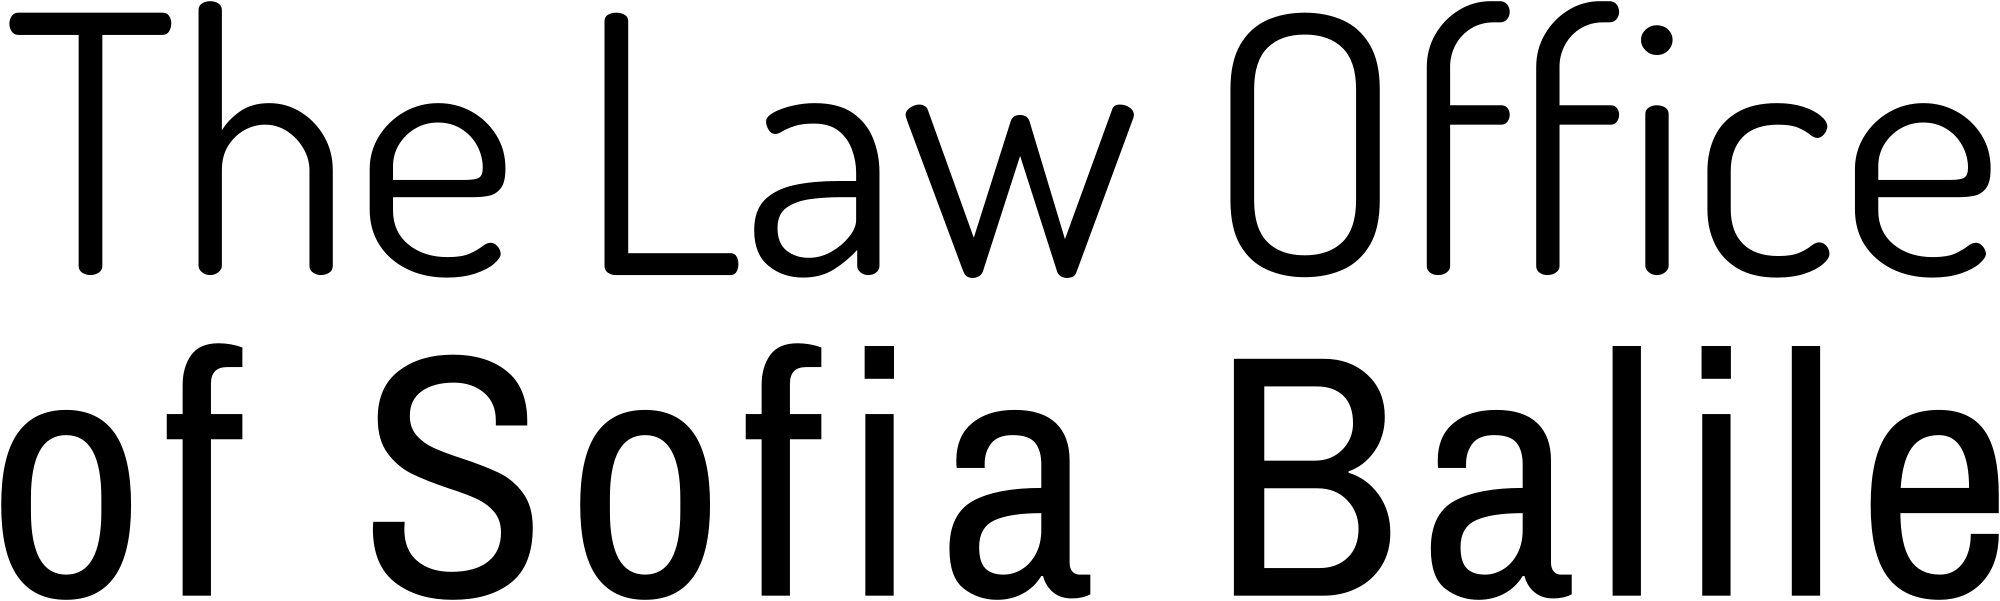 The Law Office of Sofia Balile